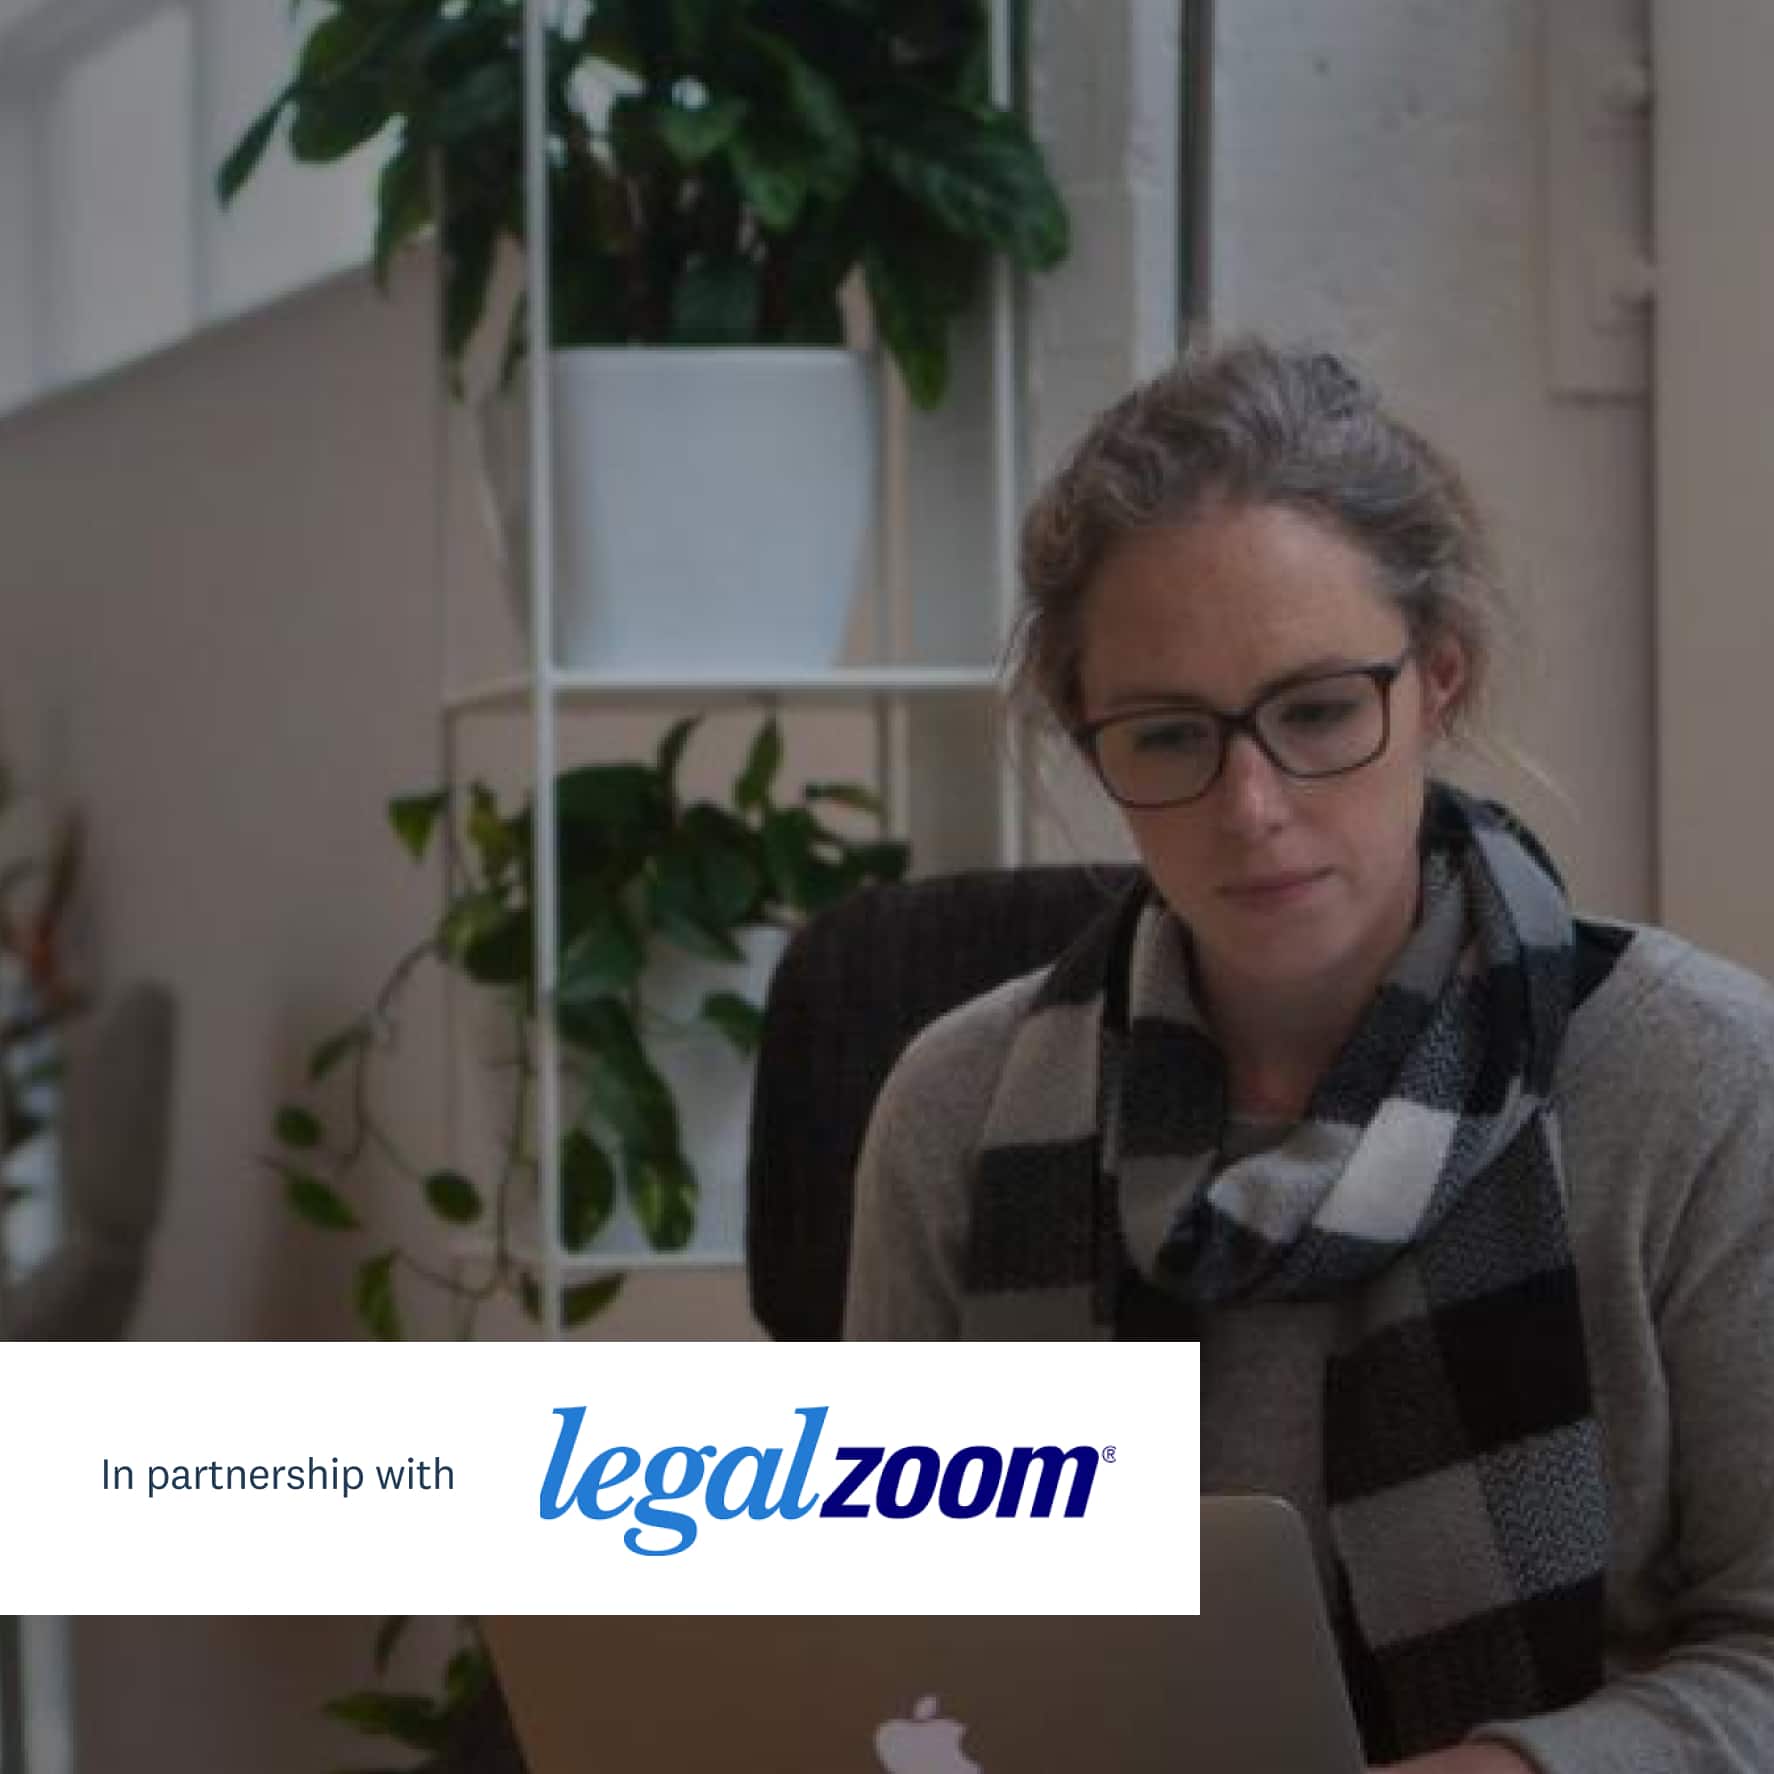 Xero in partnership with legalzoom